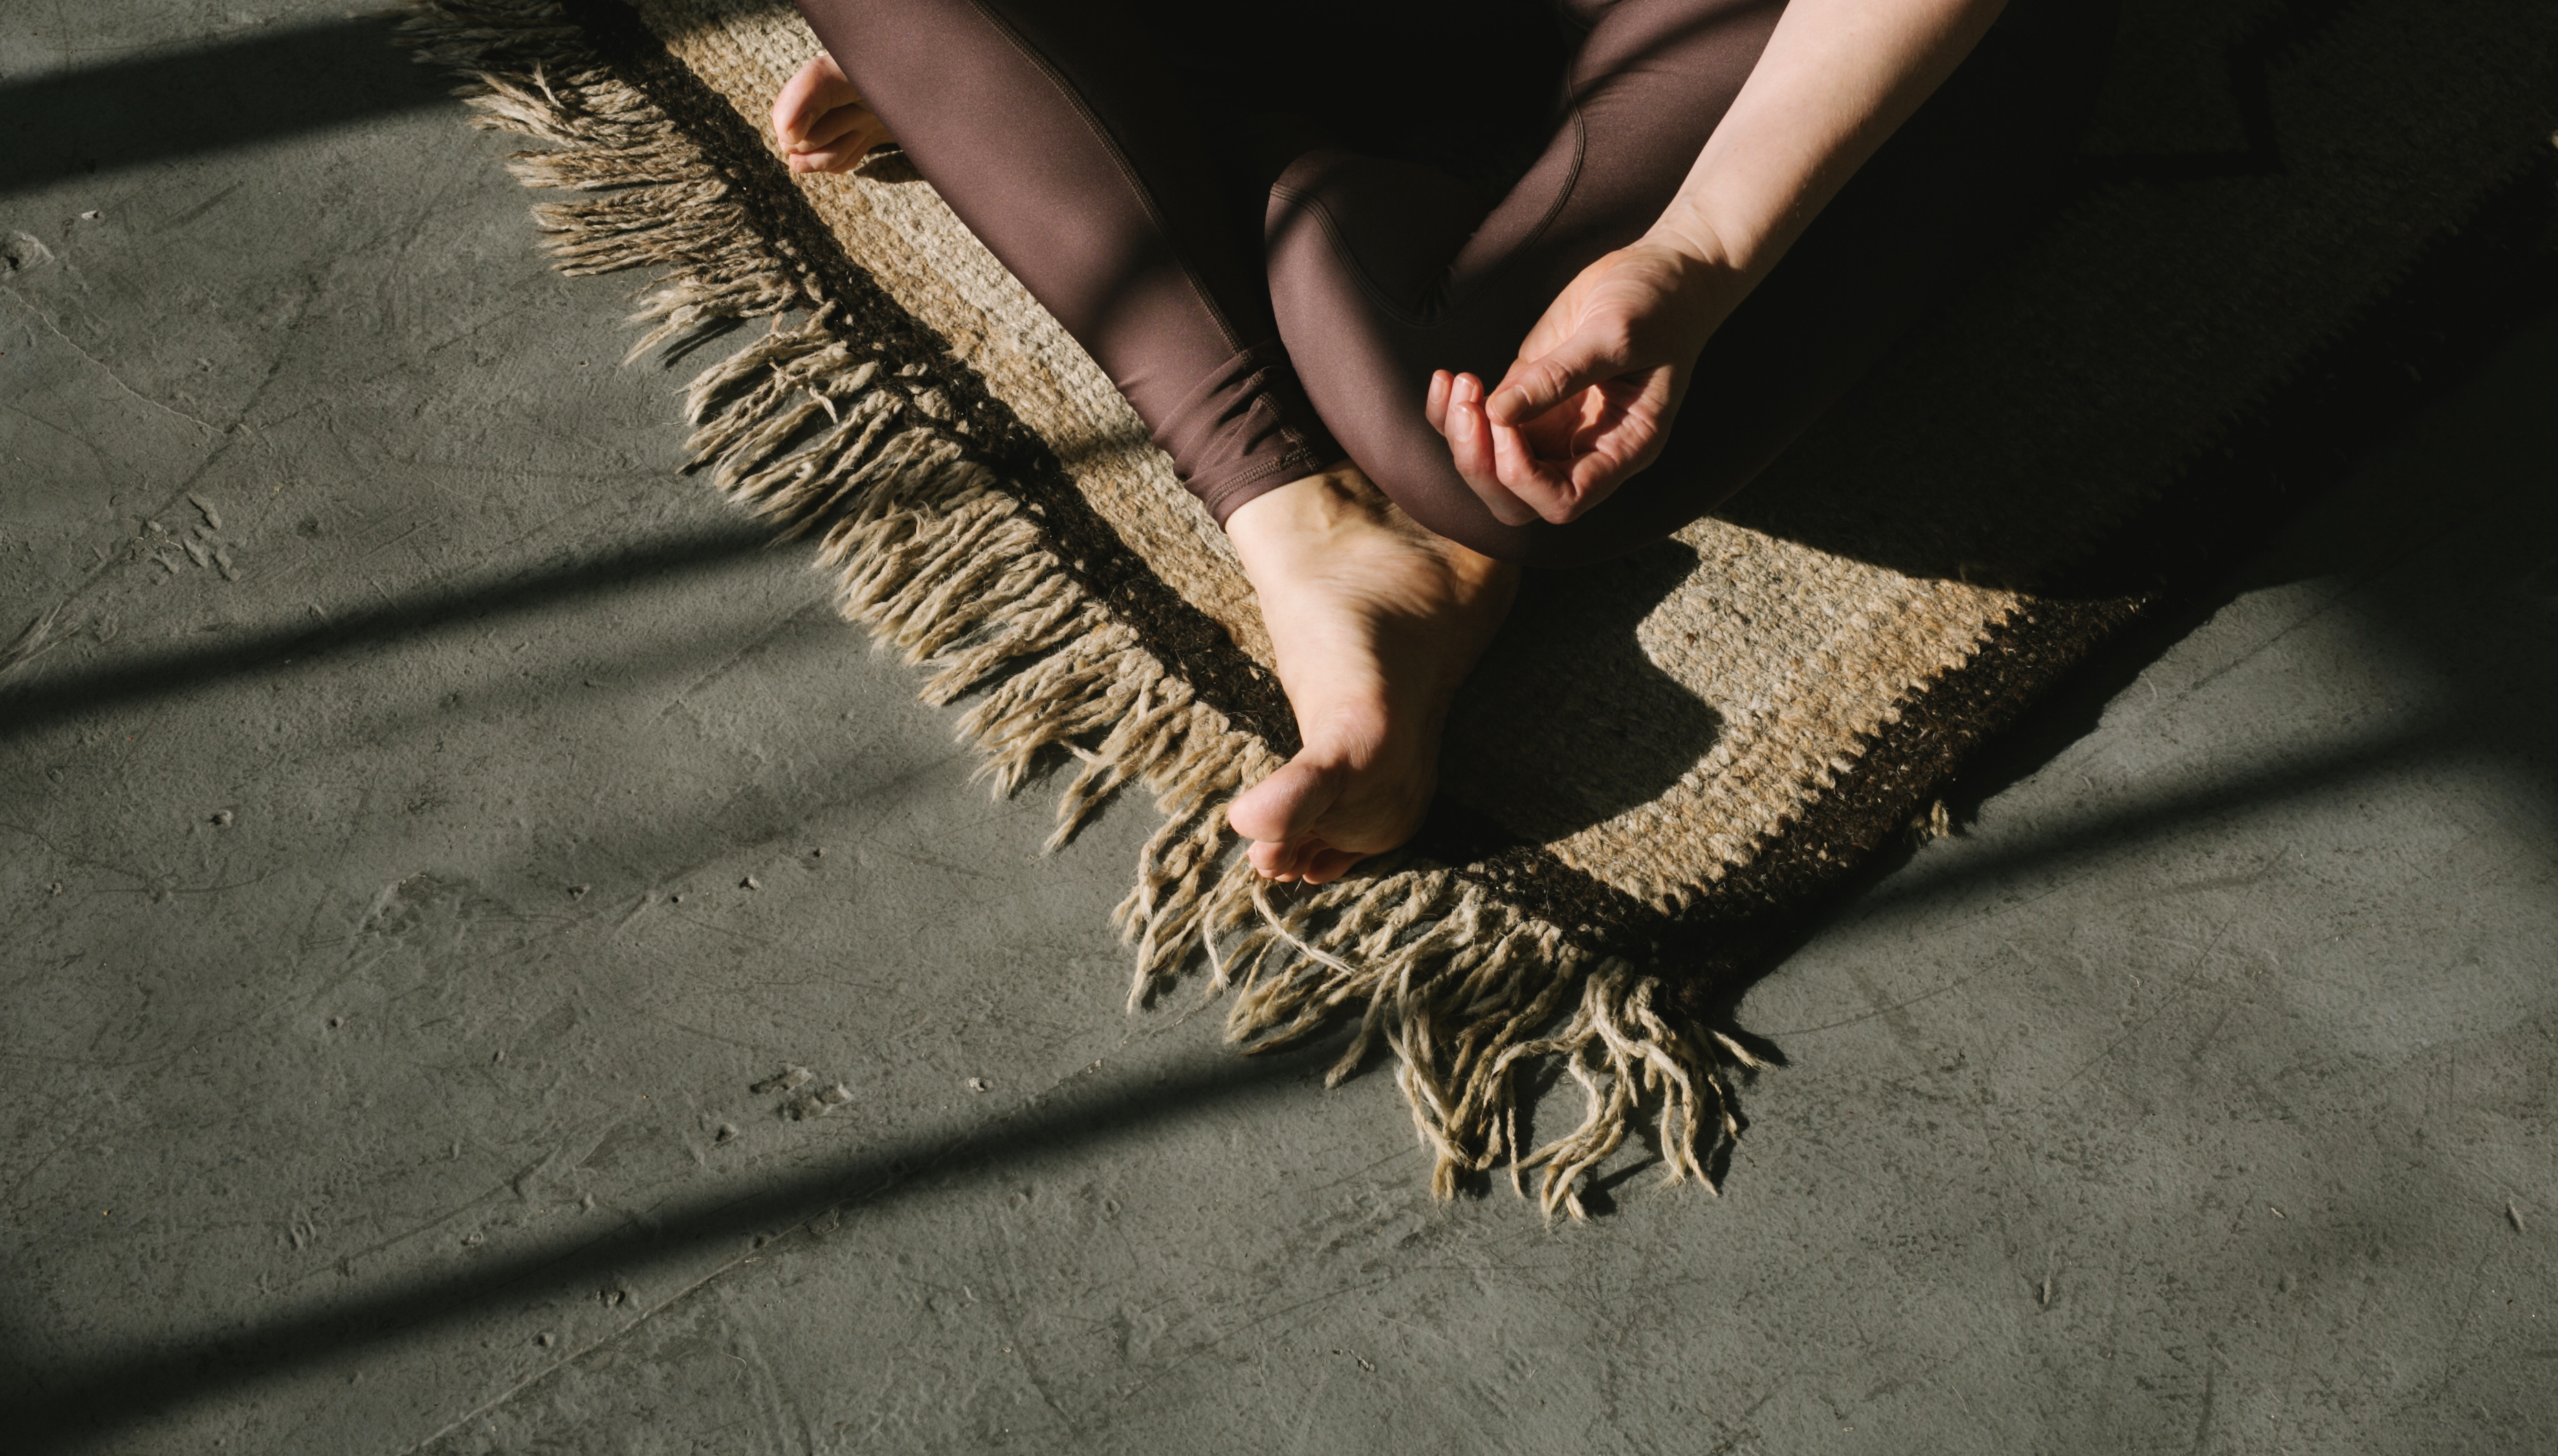 cross-legged seat wearing mauve-colored pants sitting on rug on top of concrete floor, light and shadows